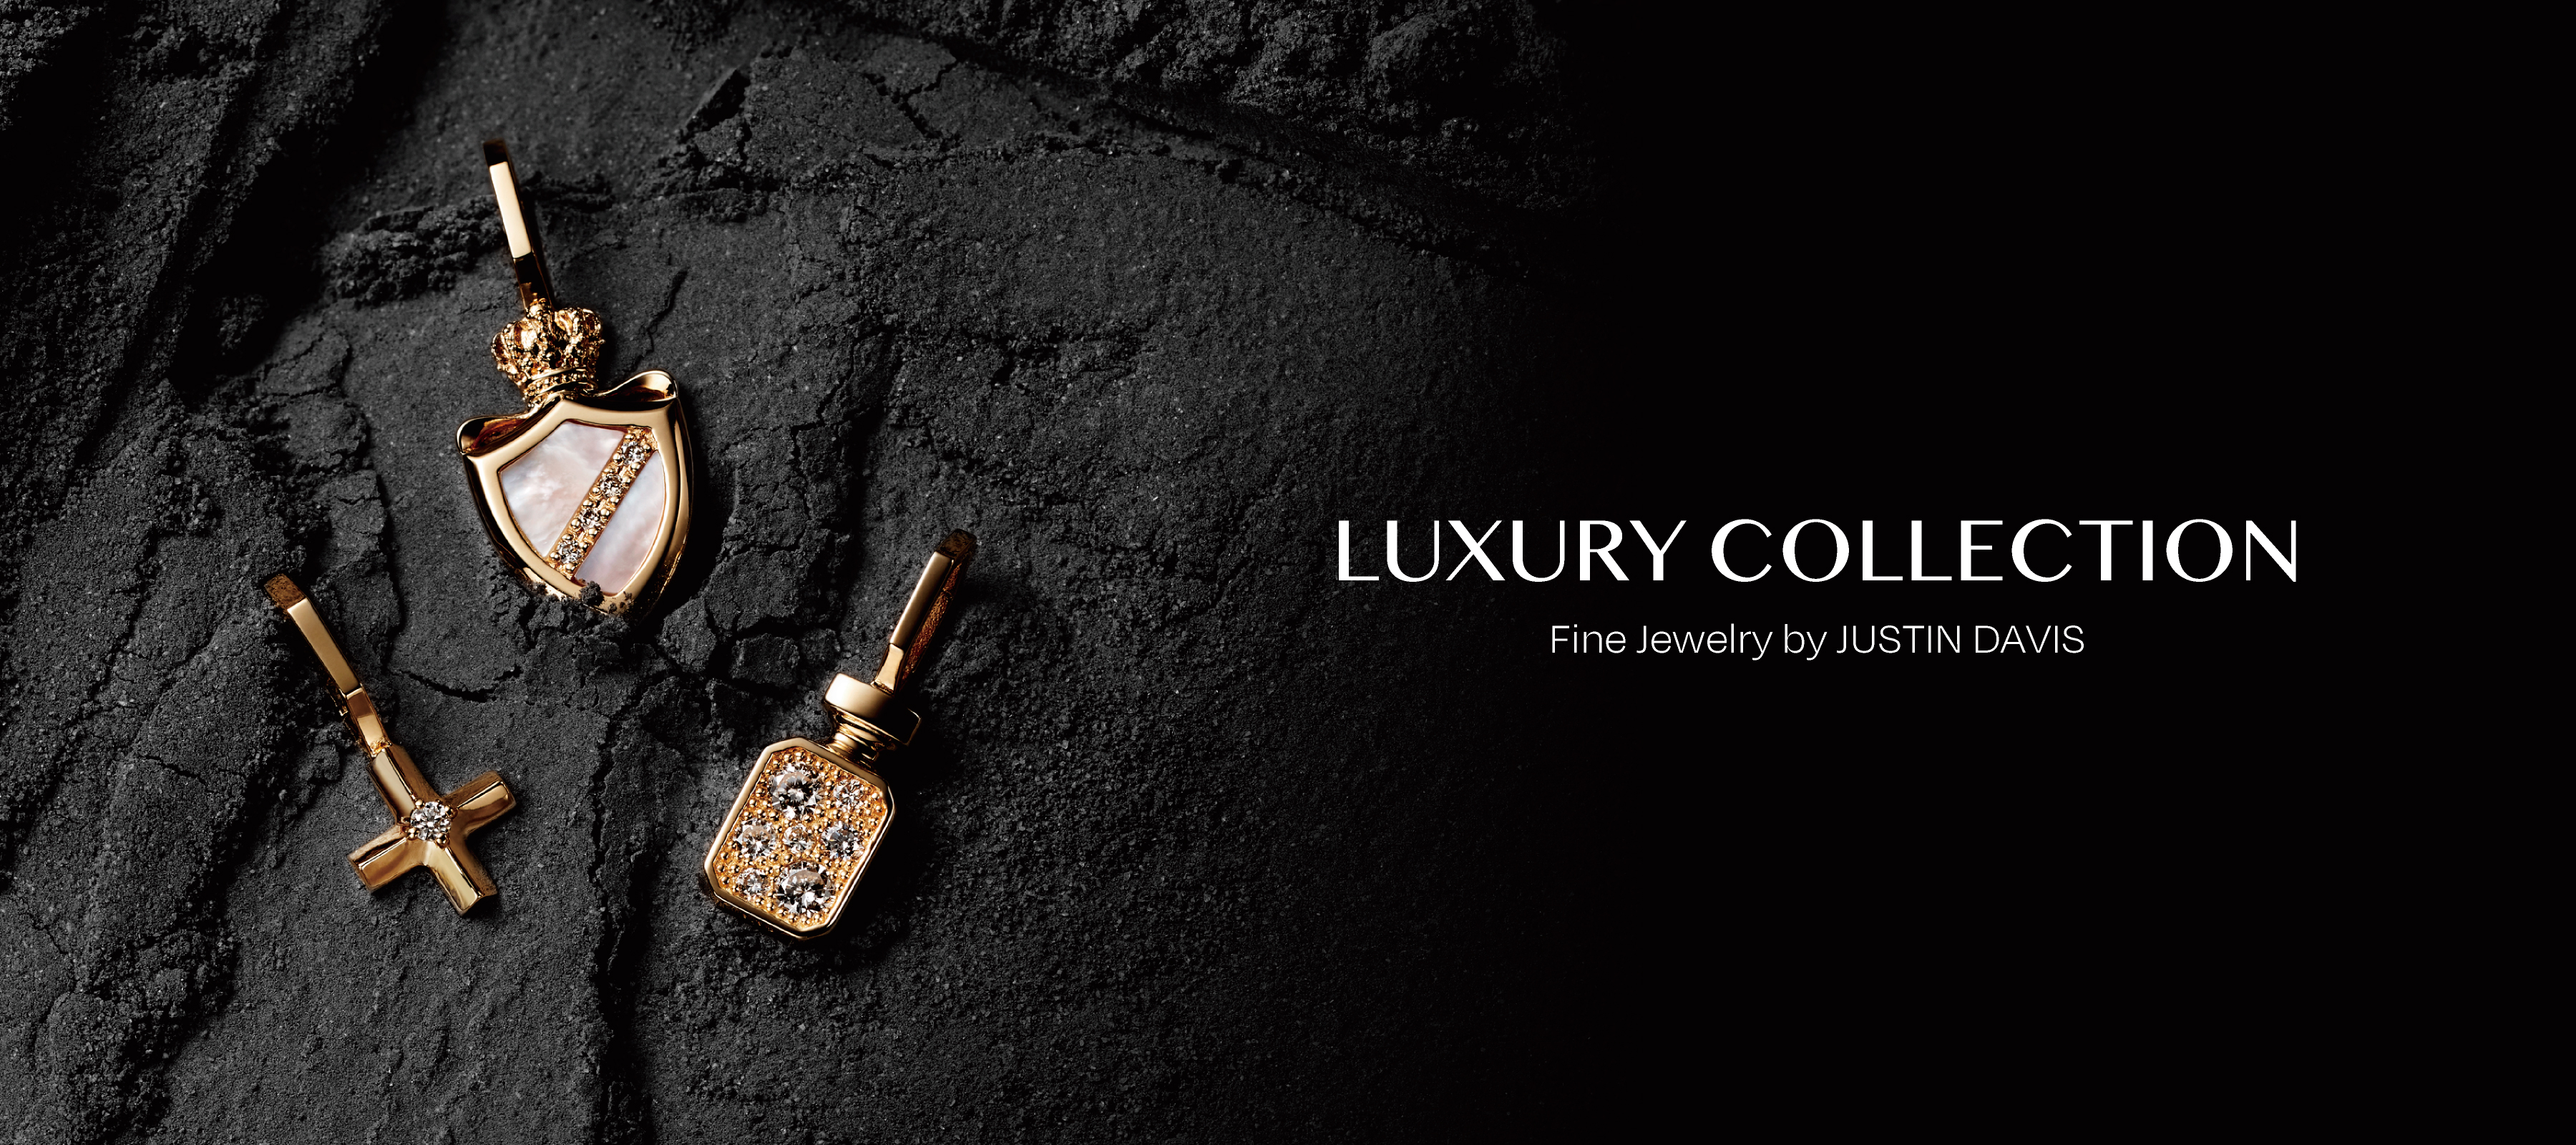 LUXURY COLLECTION